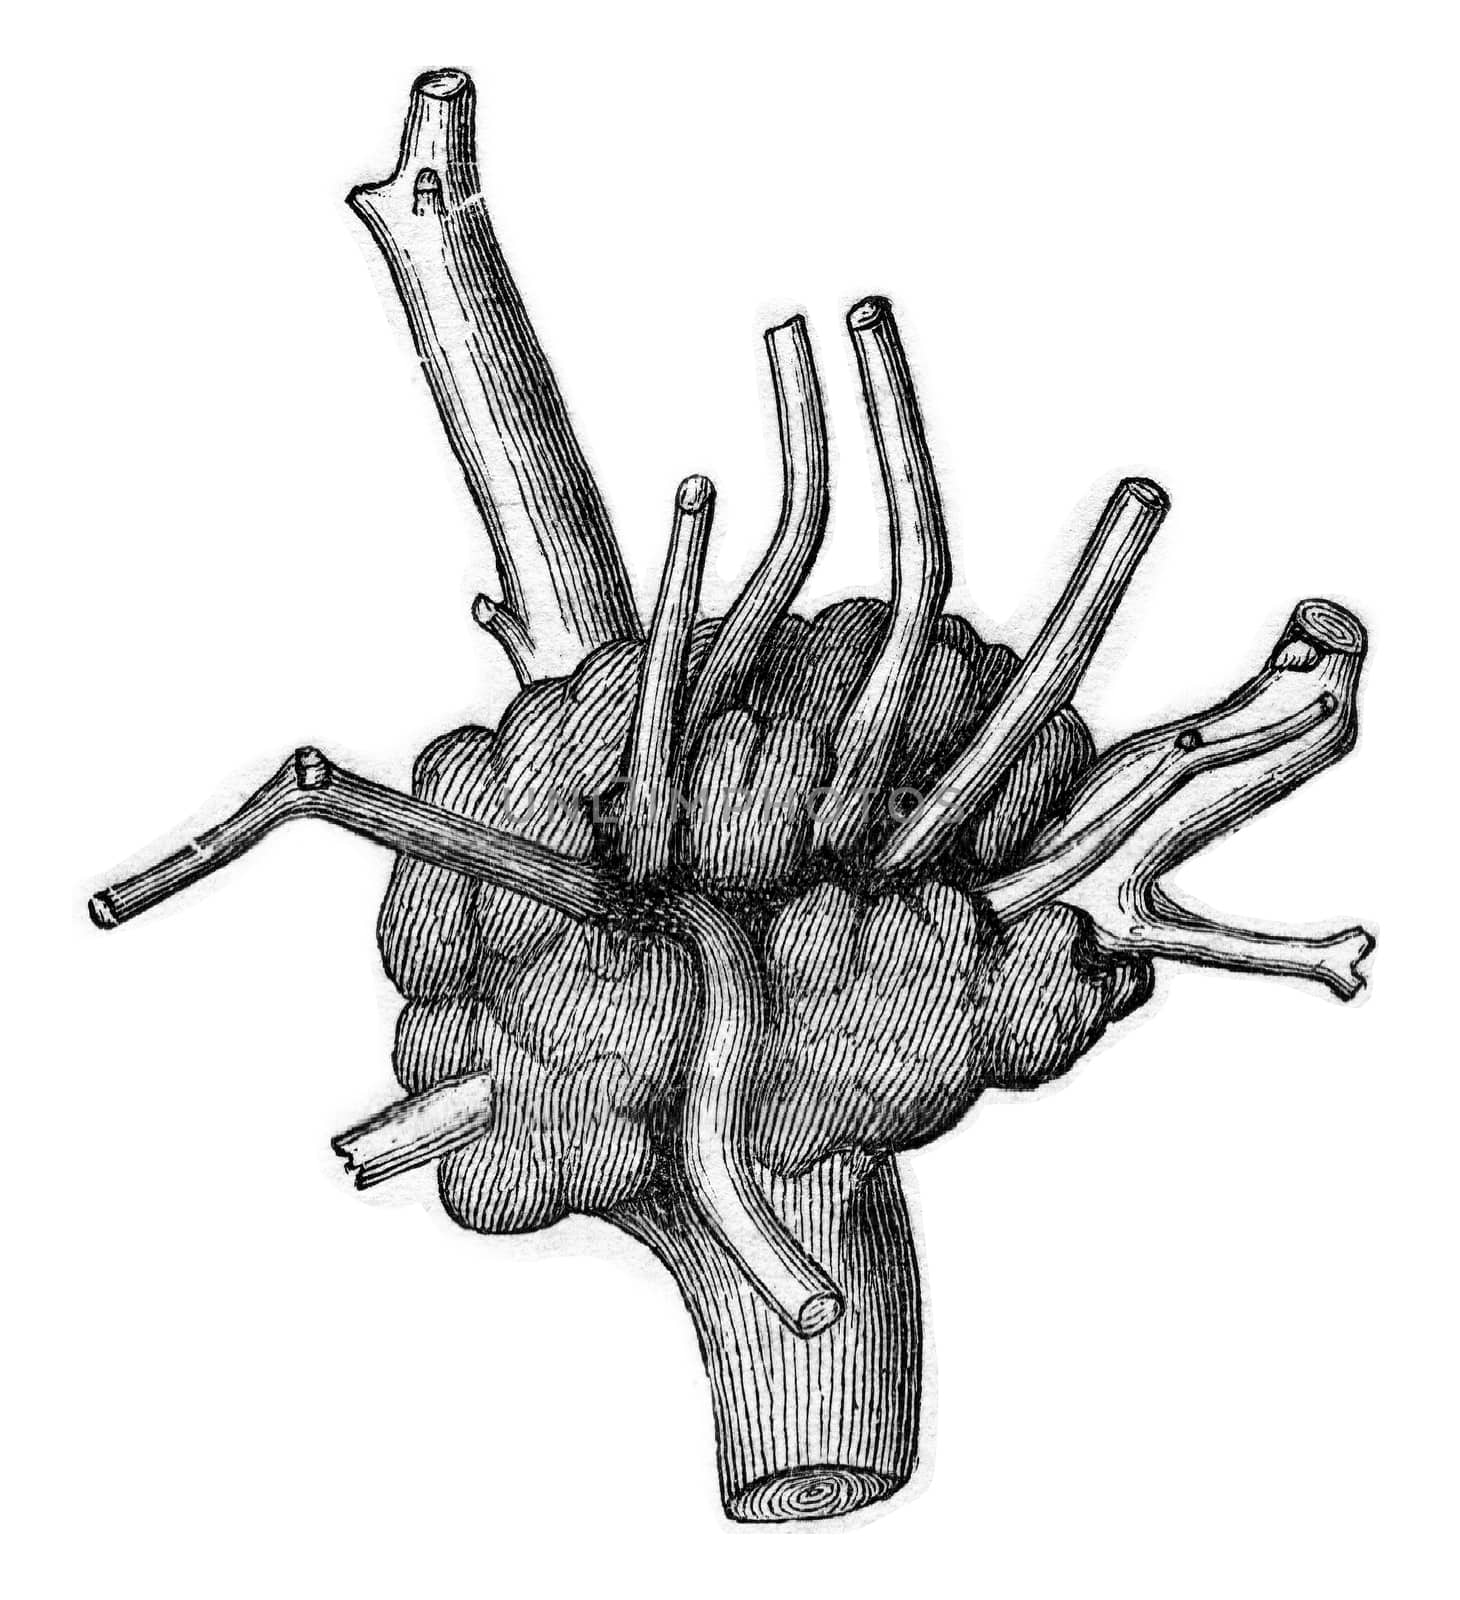 Magnifier produced on Quercus Cerris, at the insertion of an alr by Morphart